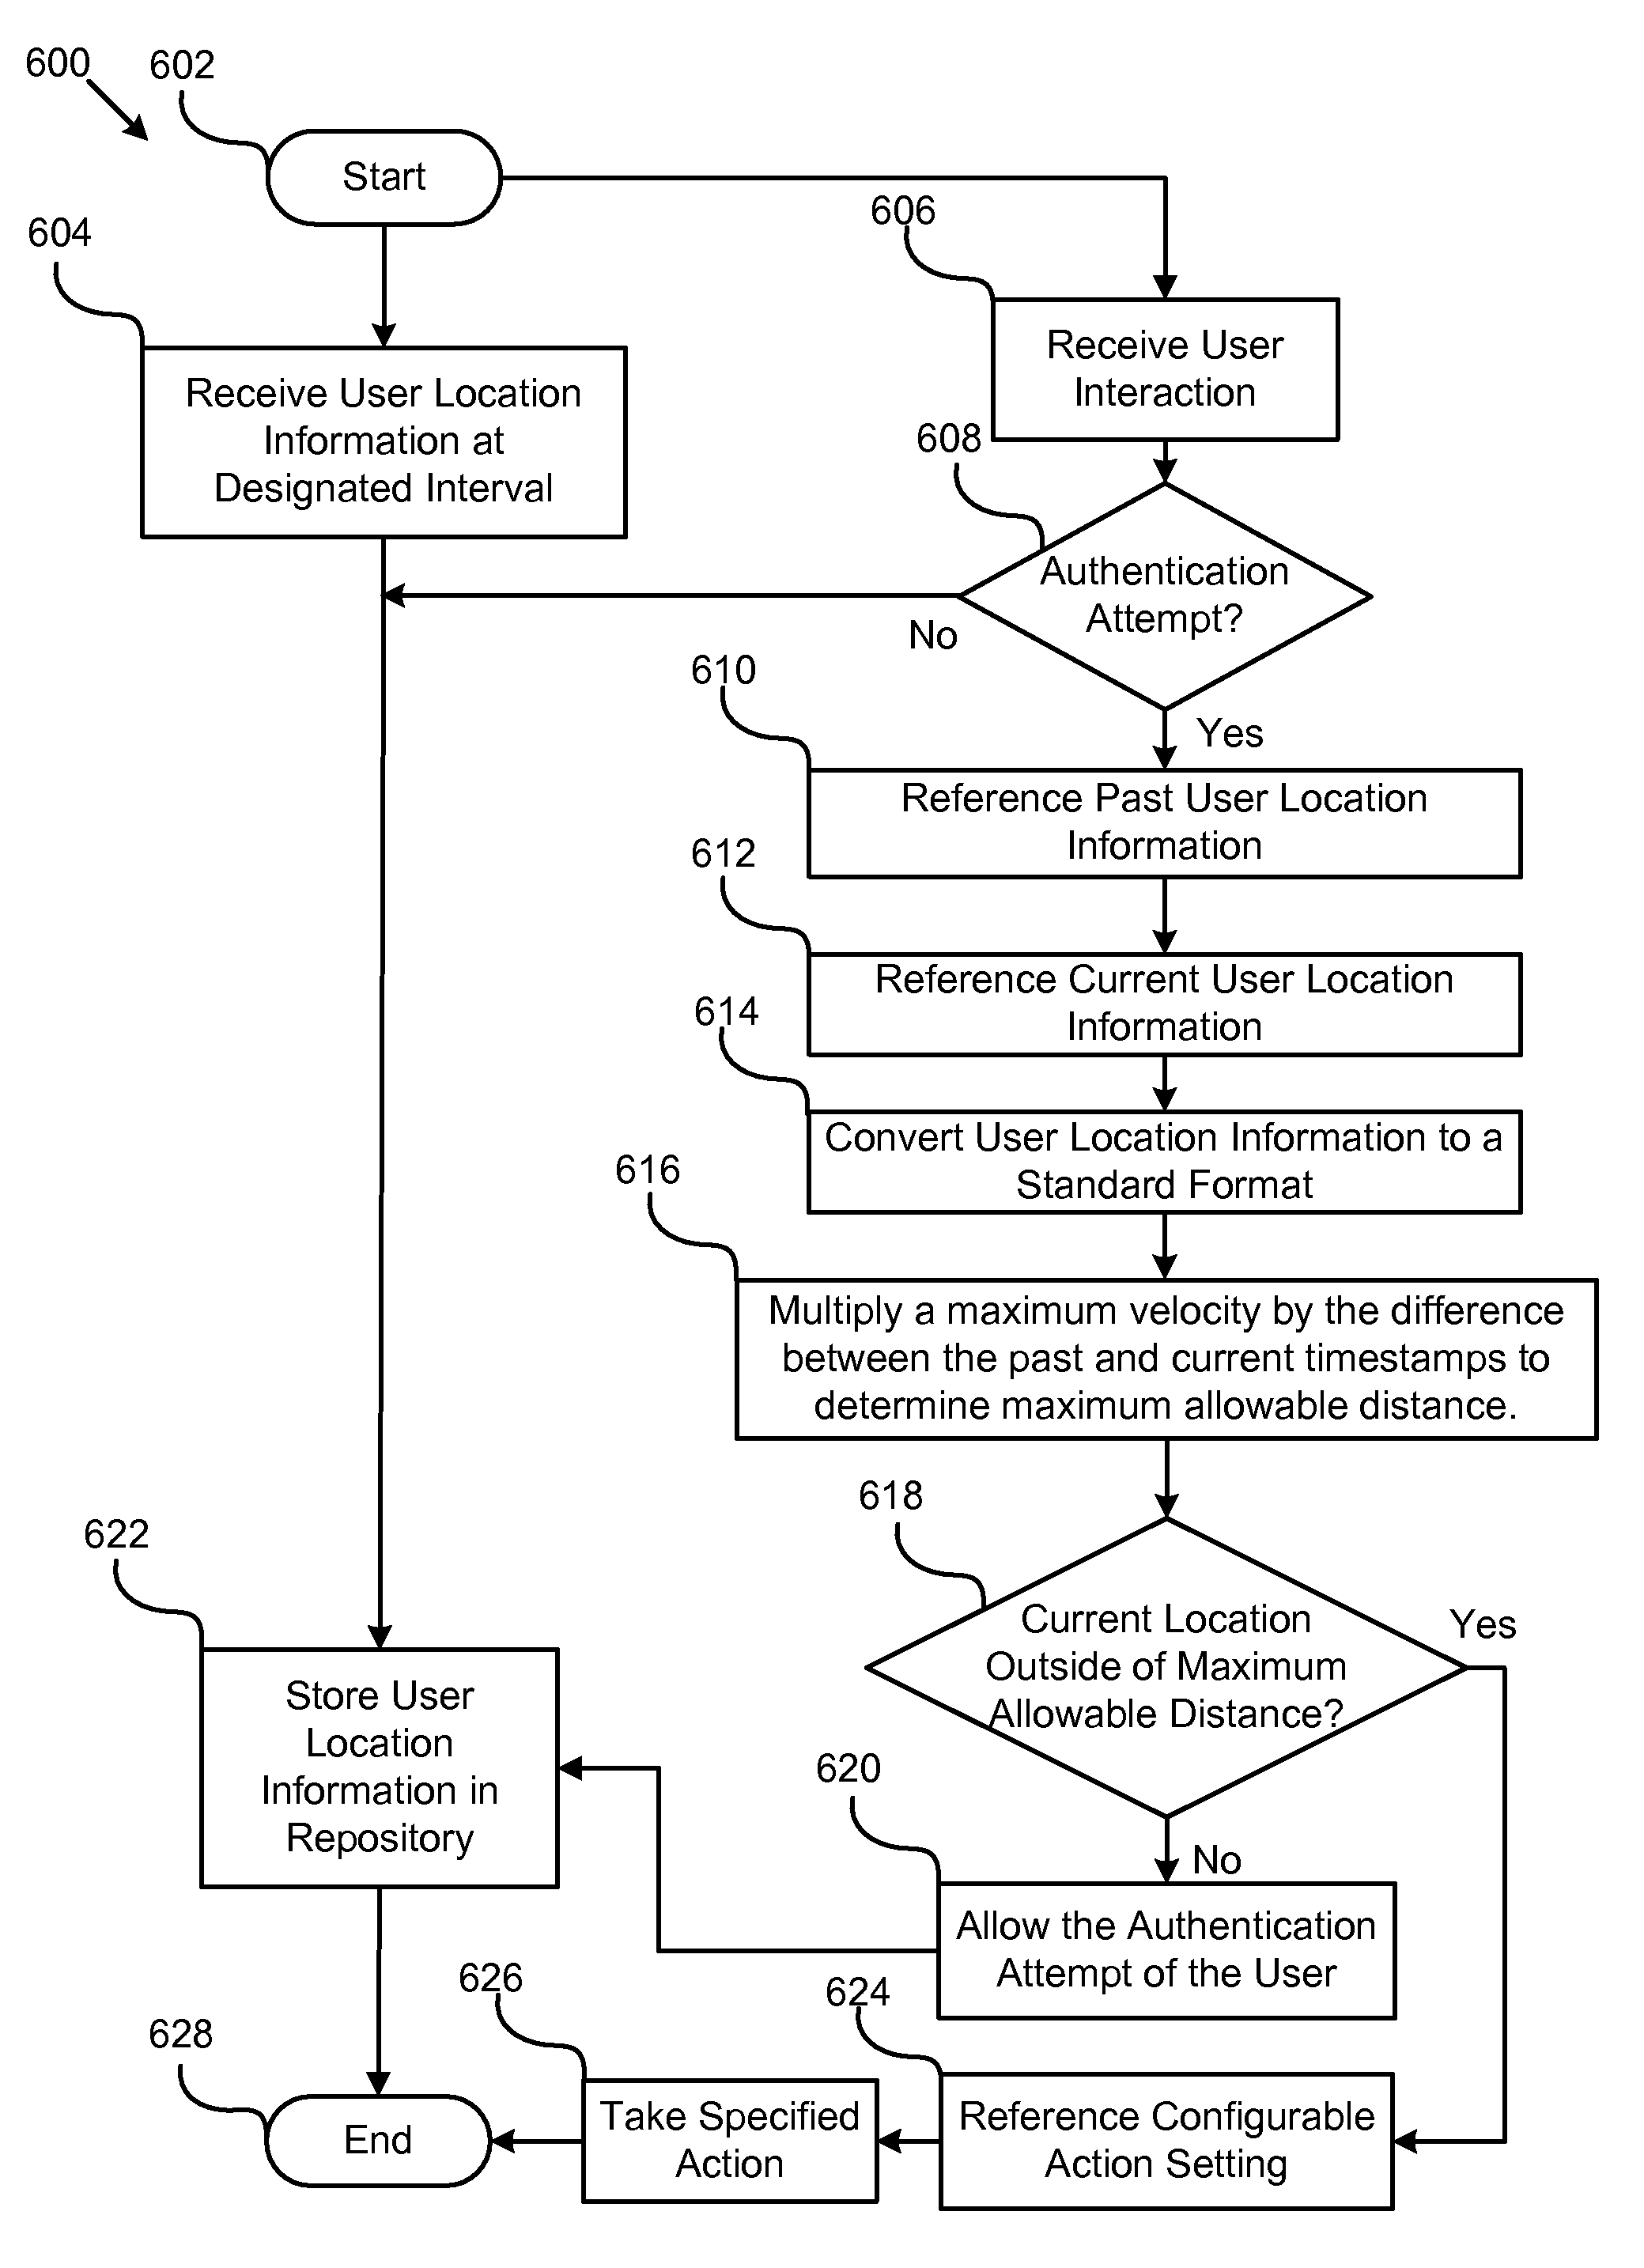 Apparatus, system, and method for user authentication based on authentication credentials and location information